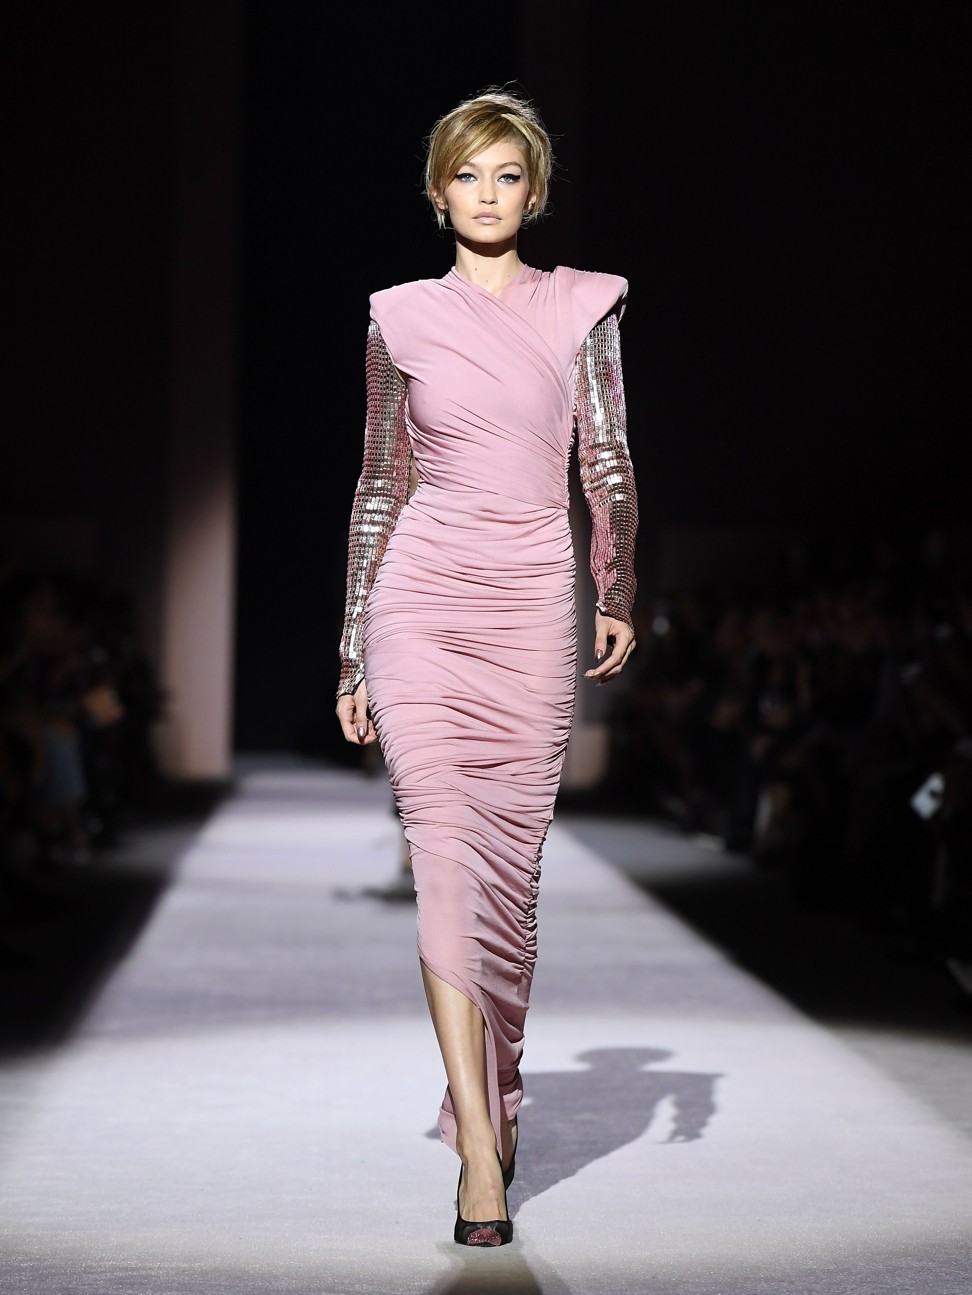 New York Fashion Week kicks off with glam Tom Ford and millennials on ...